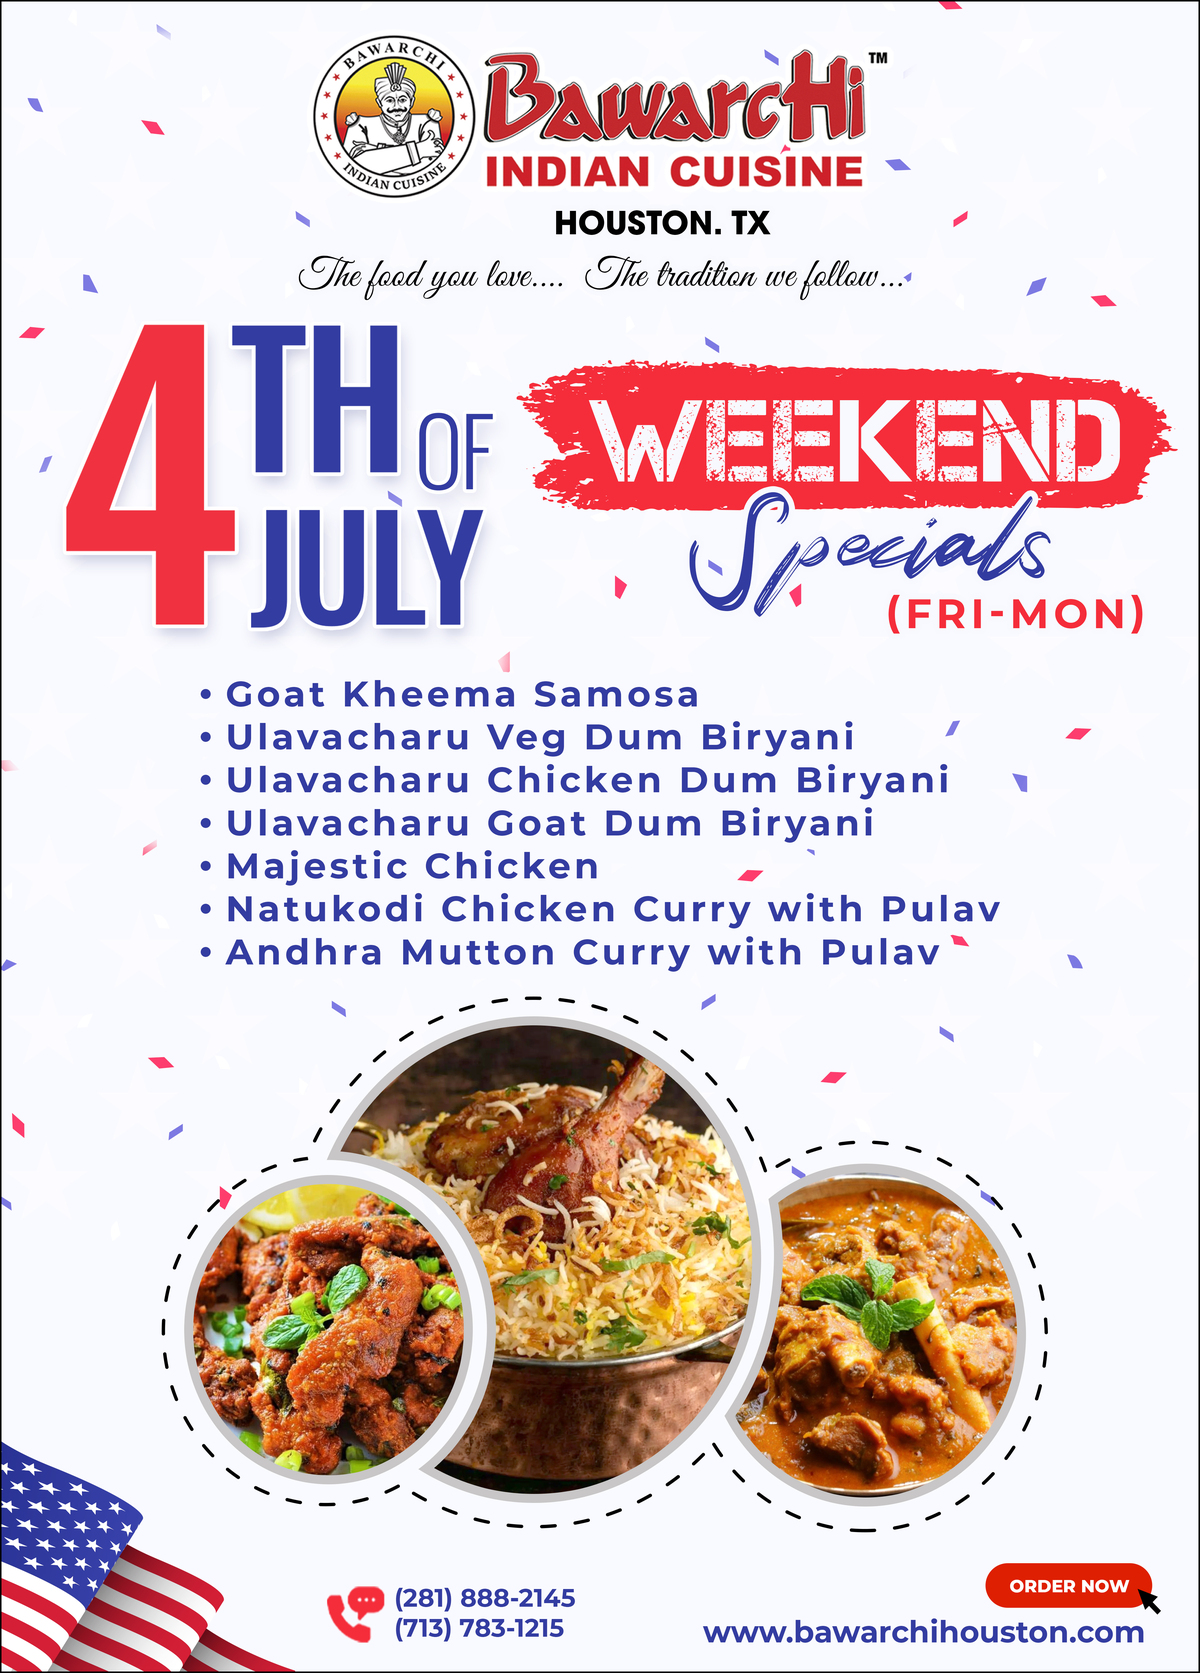 4TH OF JULY WEEKEND SPECIALS